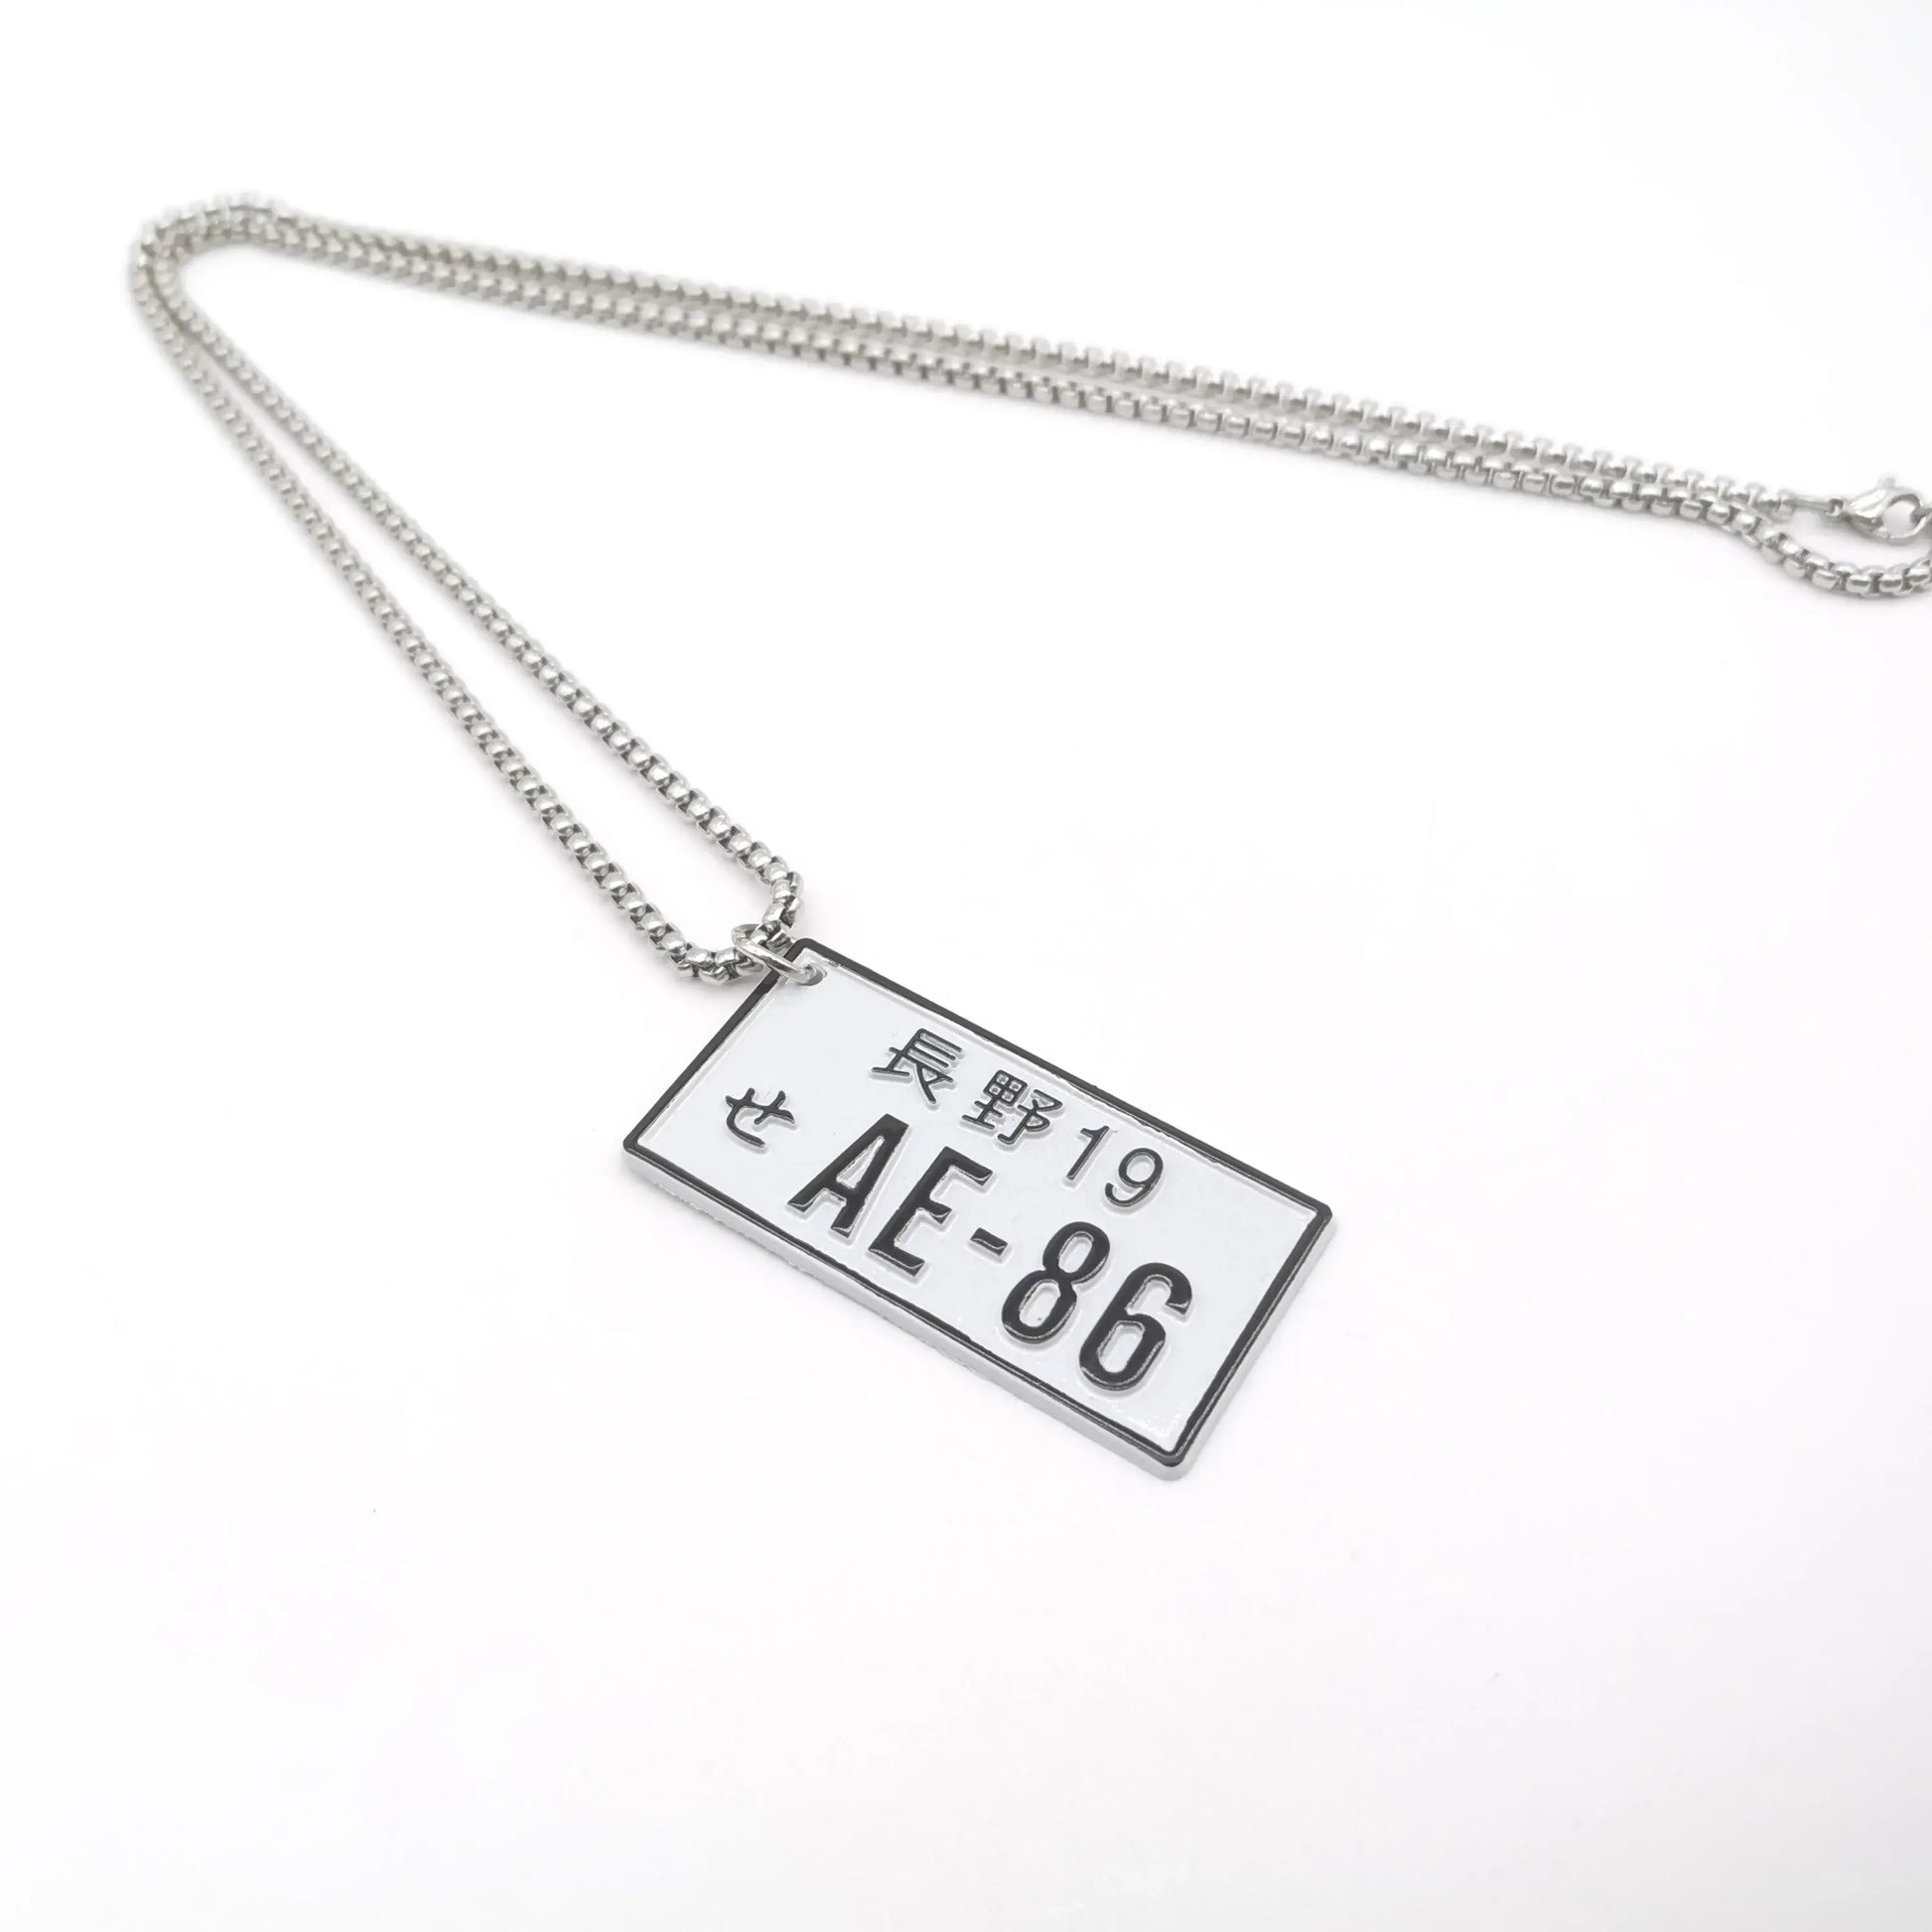 AE - 86 JDM Plate Necklace